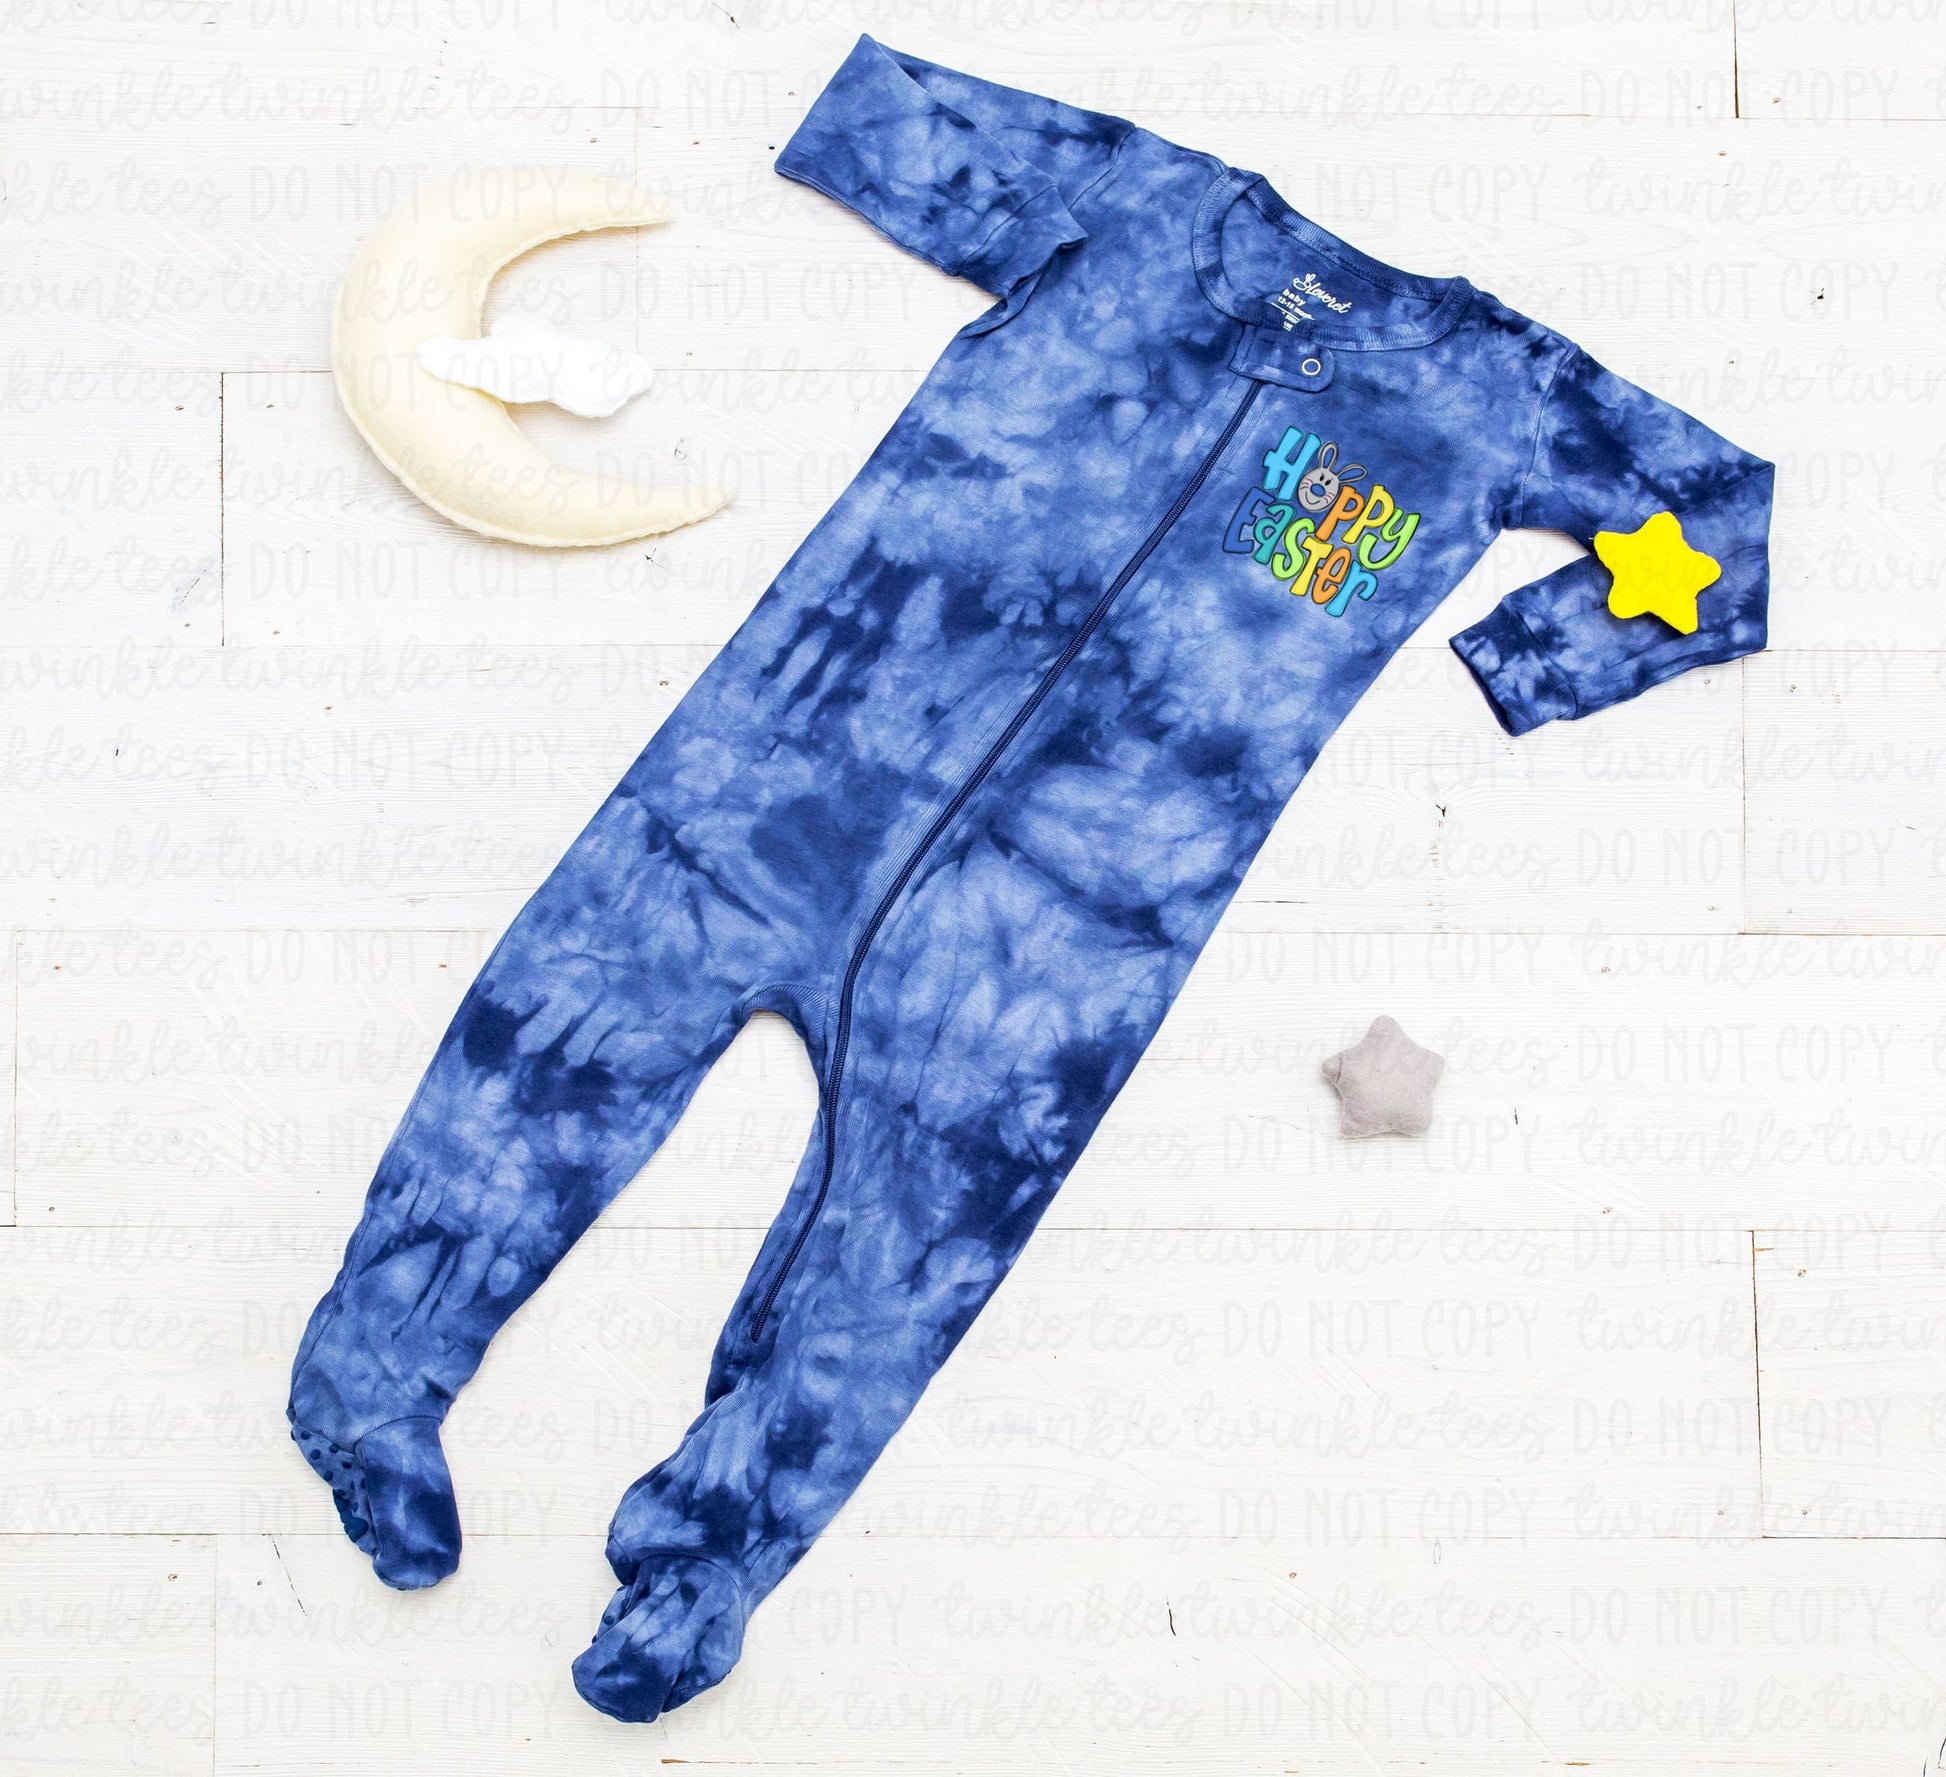 Happy Easter Purple or Navy Tie Dye Mix Pajamas, easter pajamas for the family, matching easter pajamas